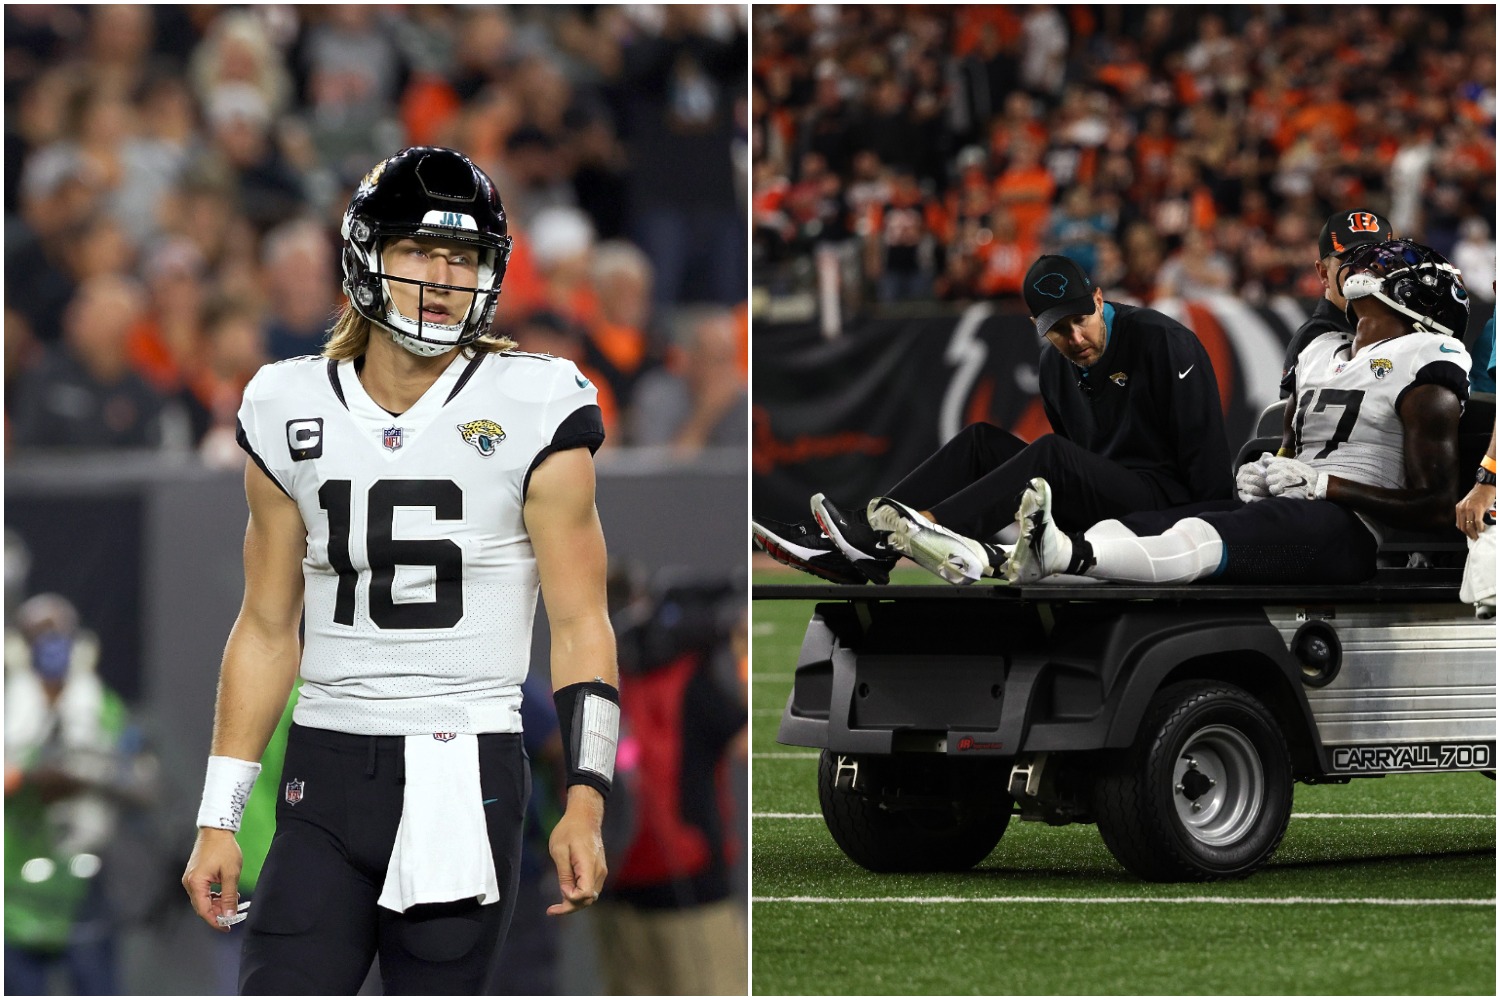 Jaguars QB Trevor Lawrence looks on during a game as teammate DJ Chark gets carted off the field.